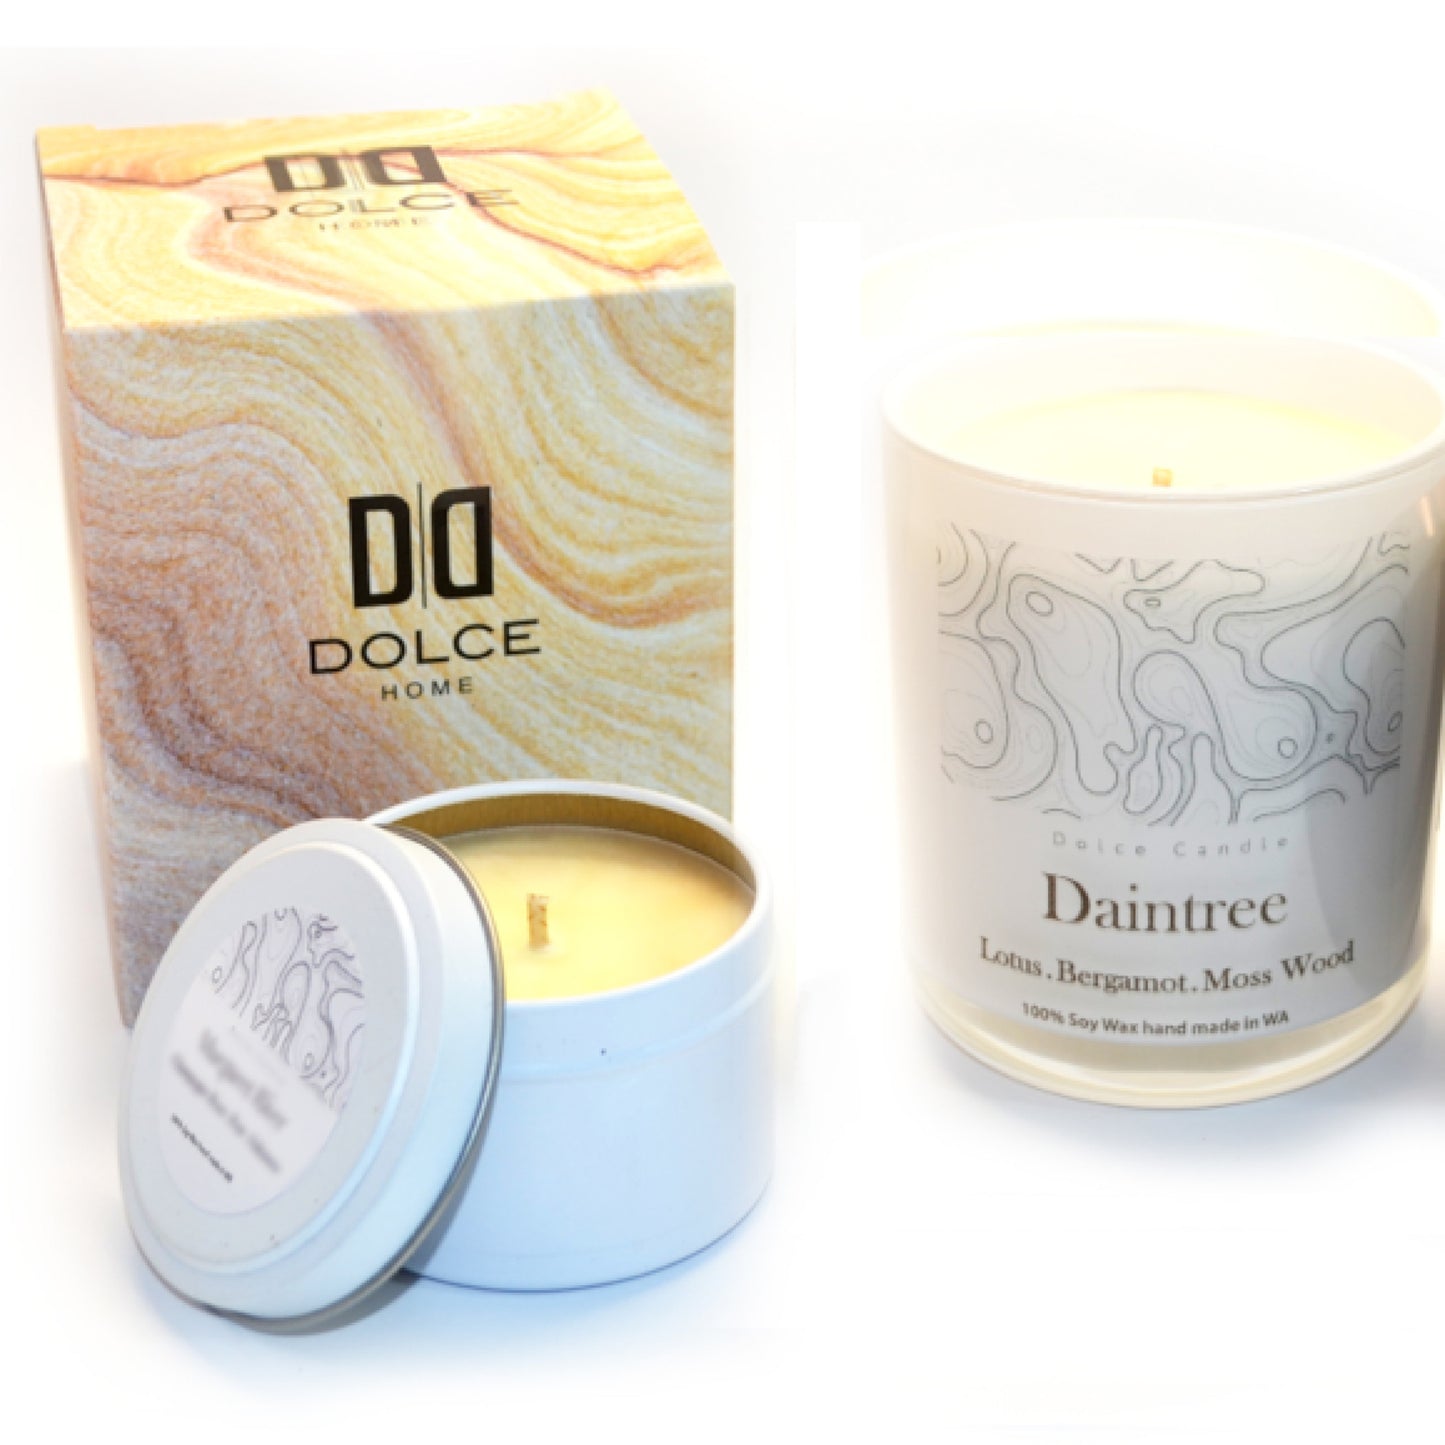 Daintree | 300g Soy Wax Candle | Dolce Home | Handmade in W.A.